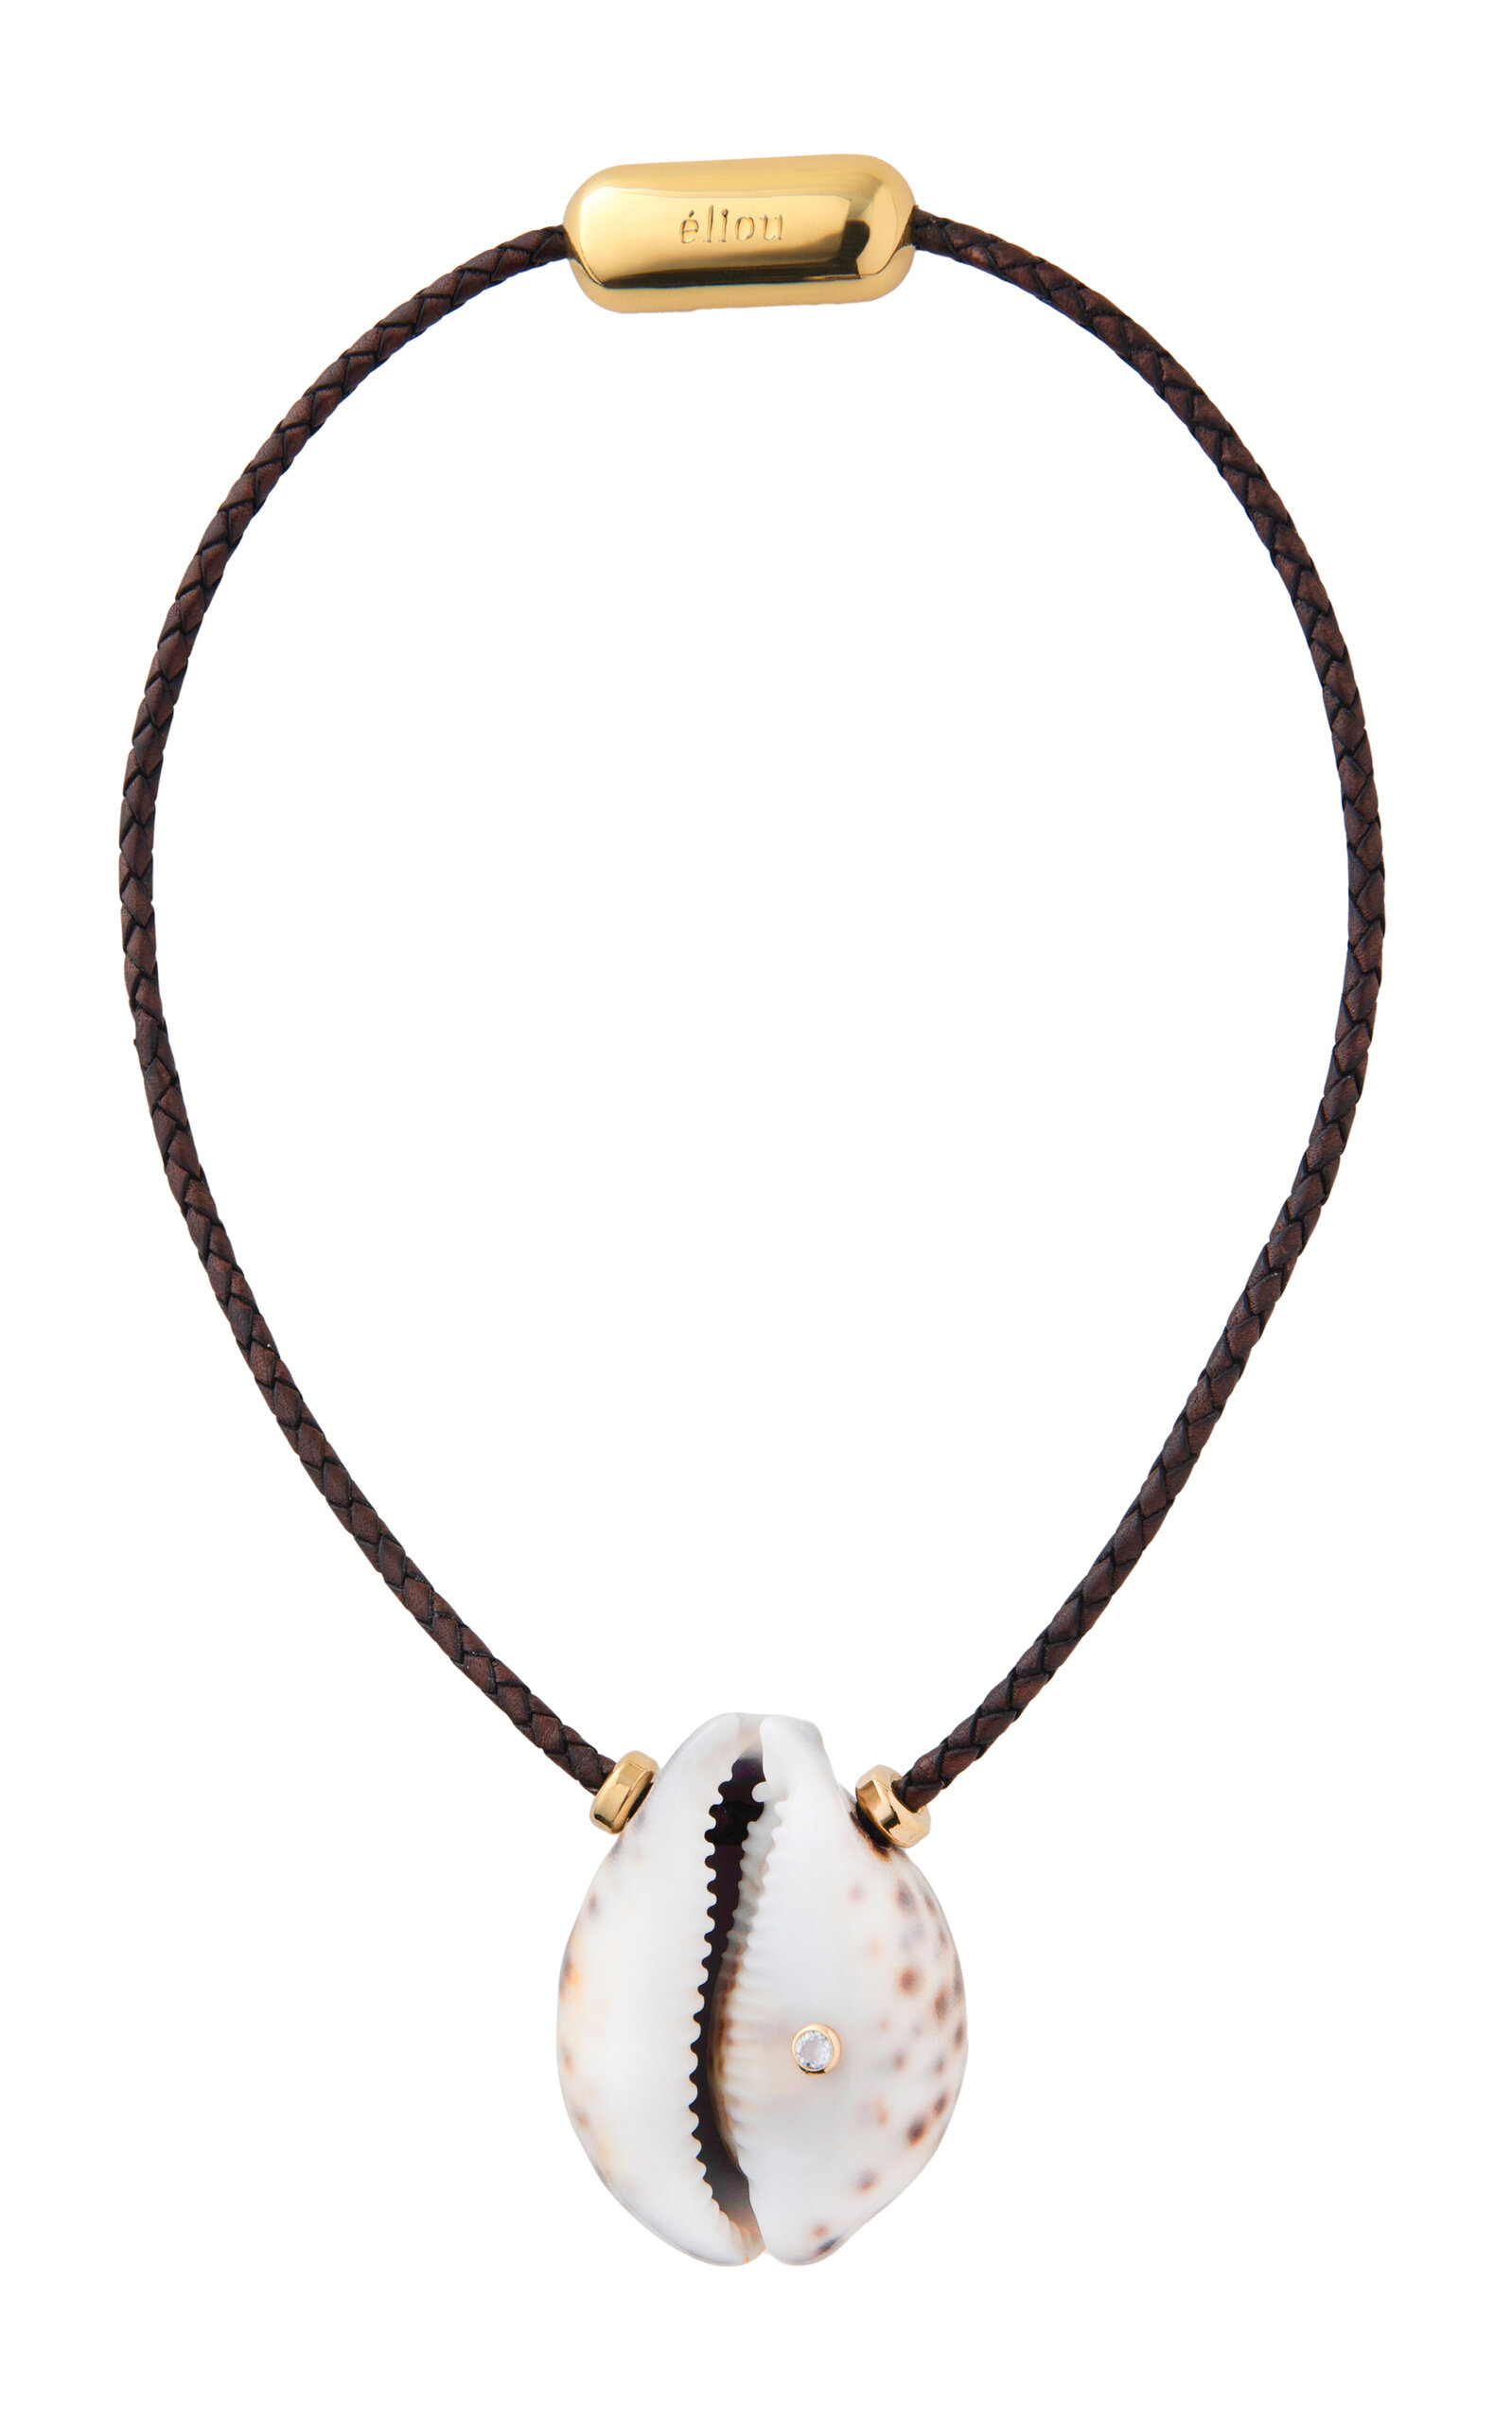 éliou Recife Gold-Plated Shell And Leather Necklace